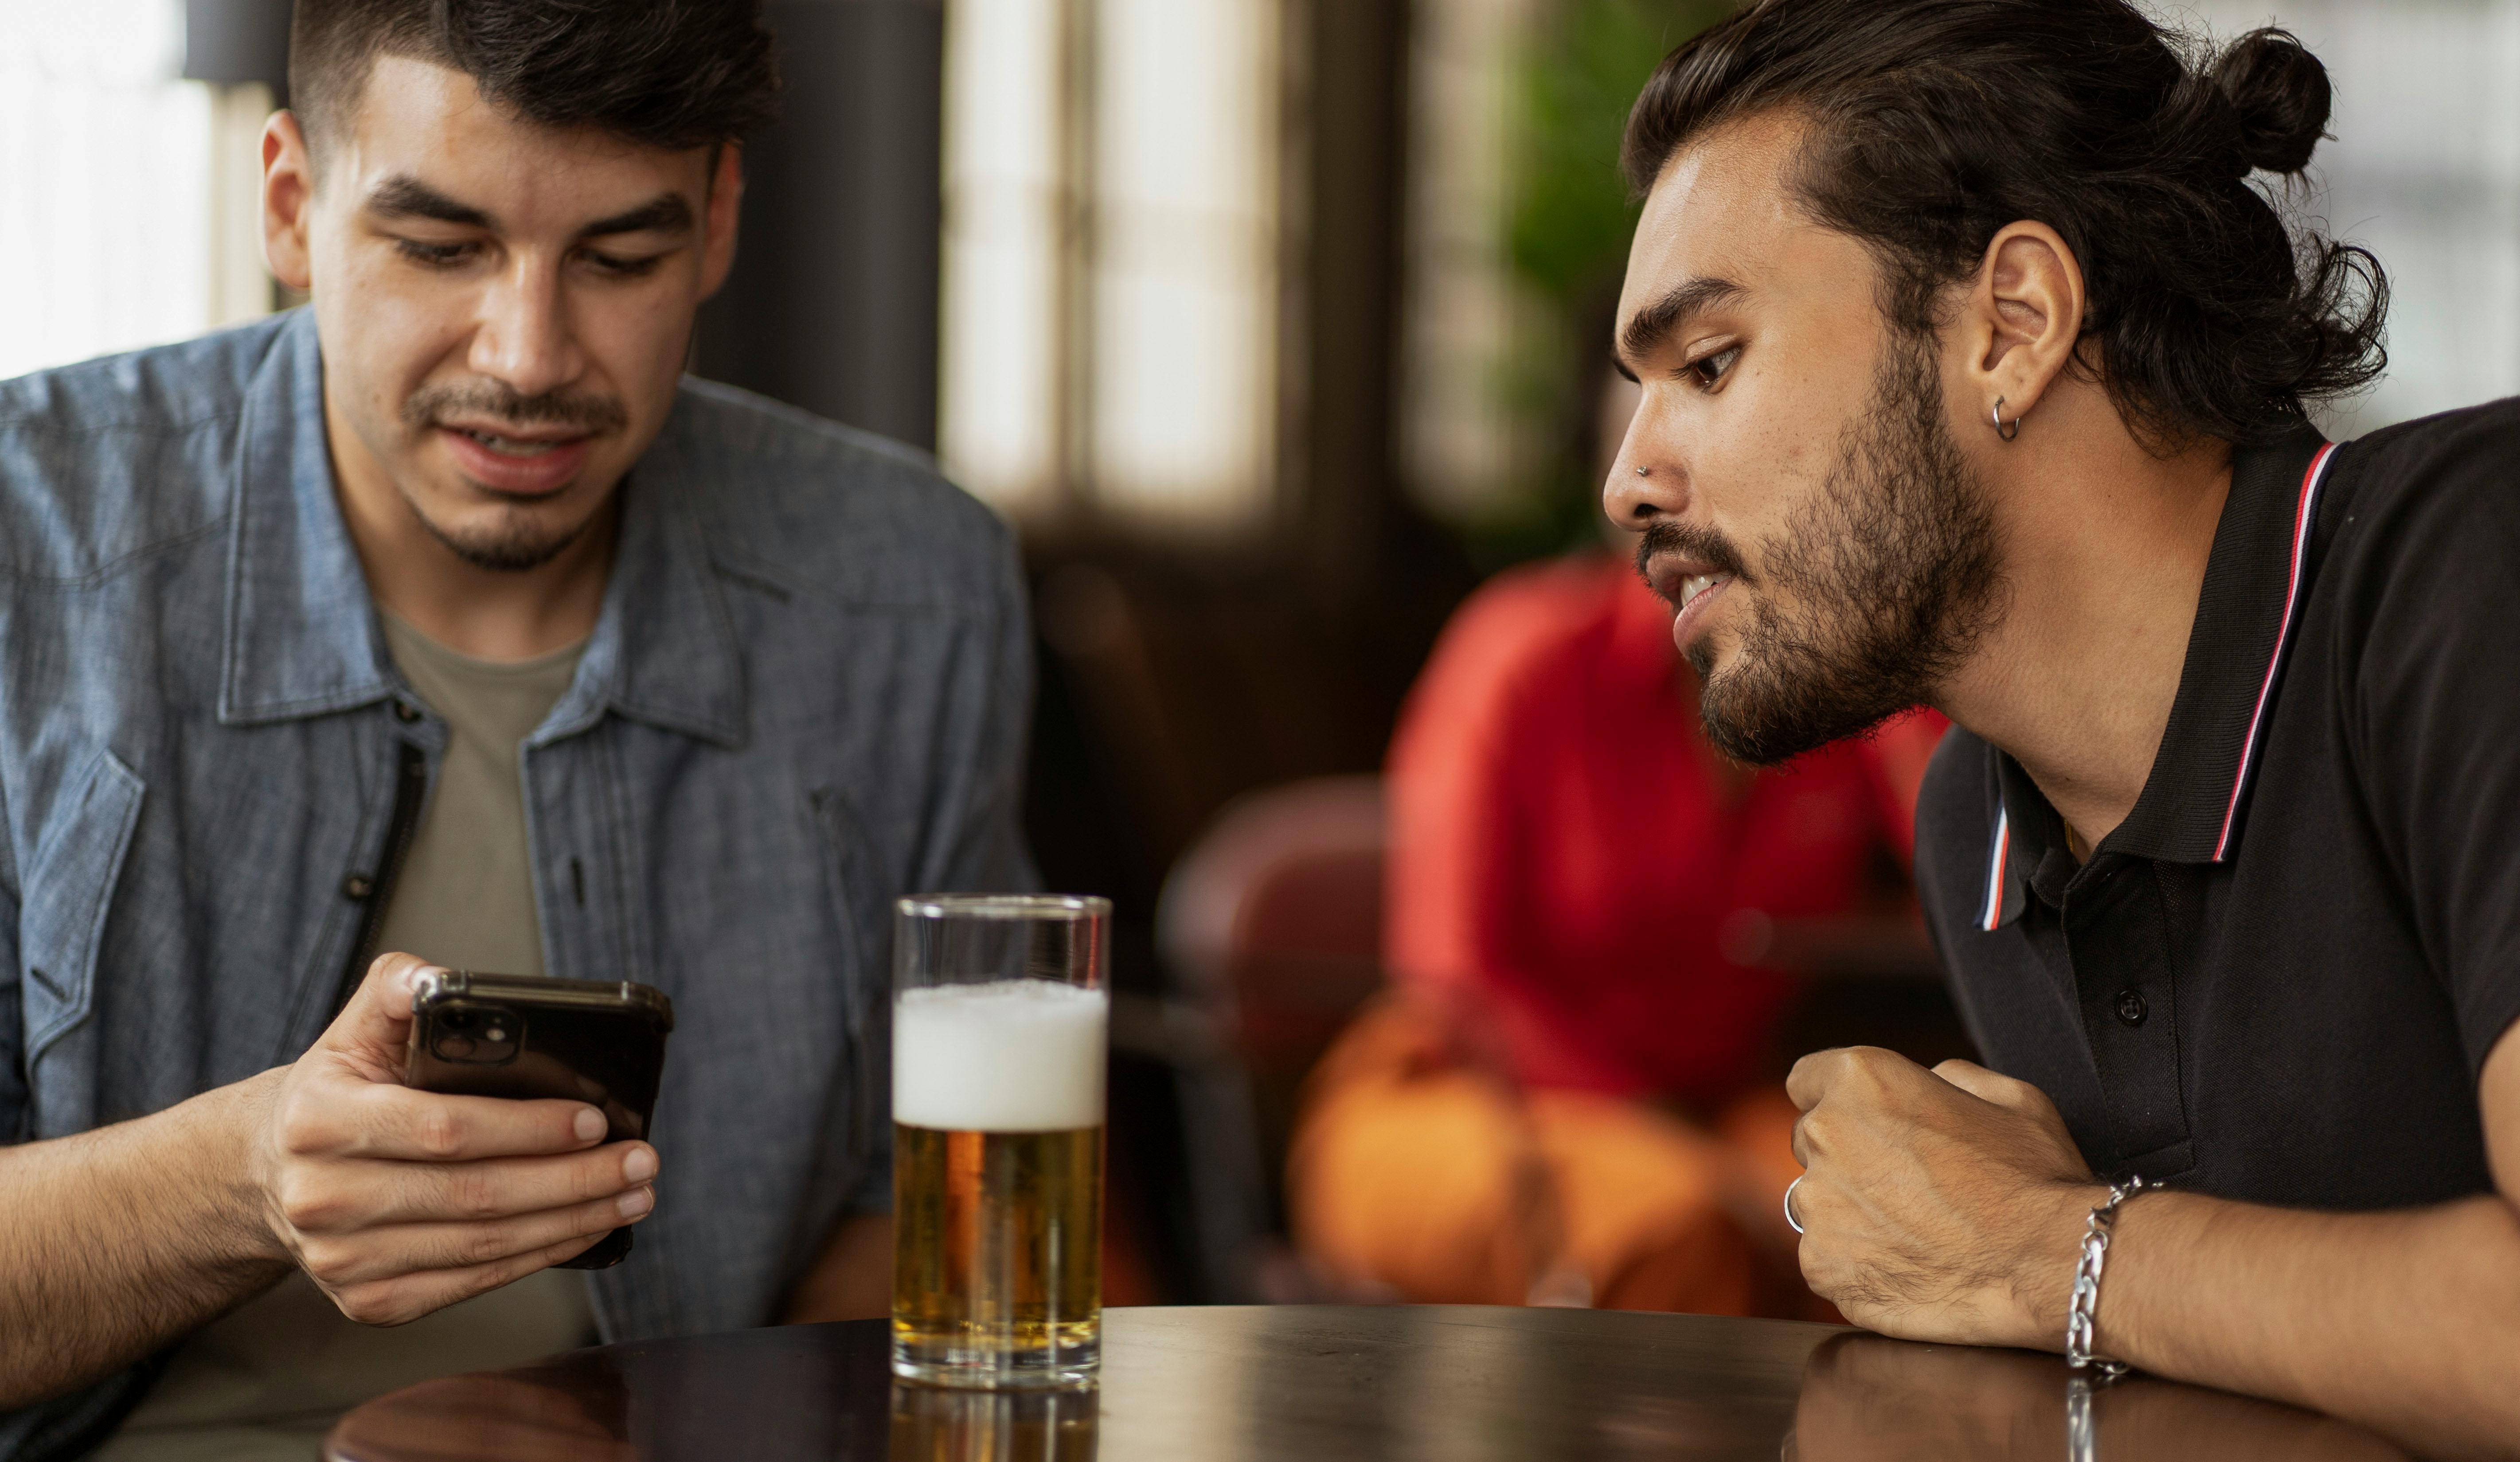 A man using a phone while another one looks over at a bar | Source: Pexels